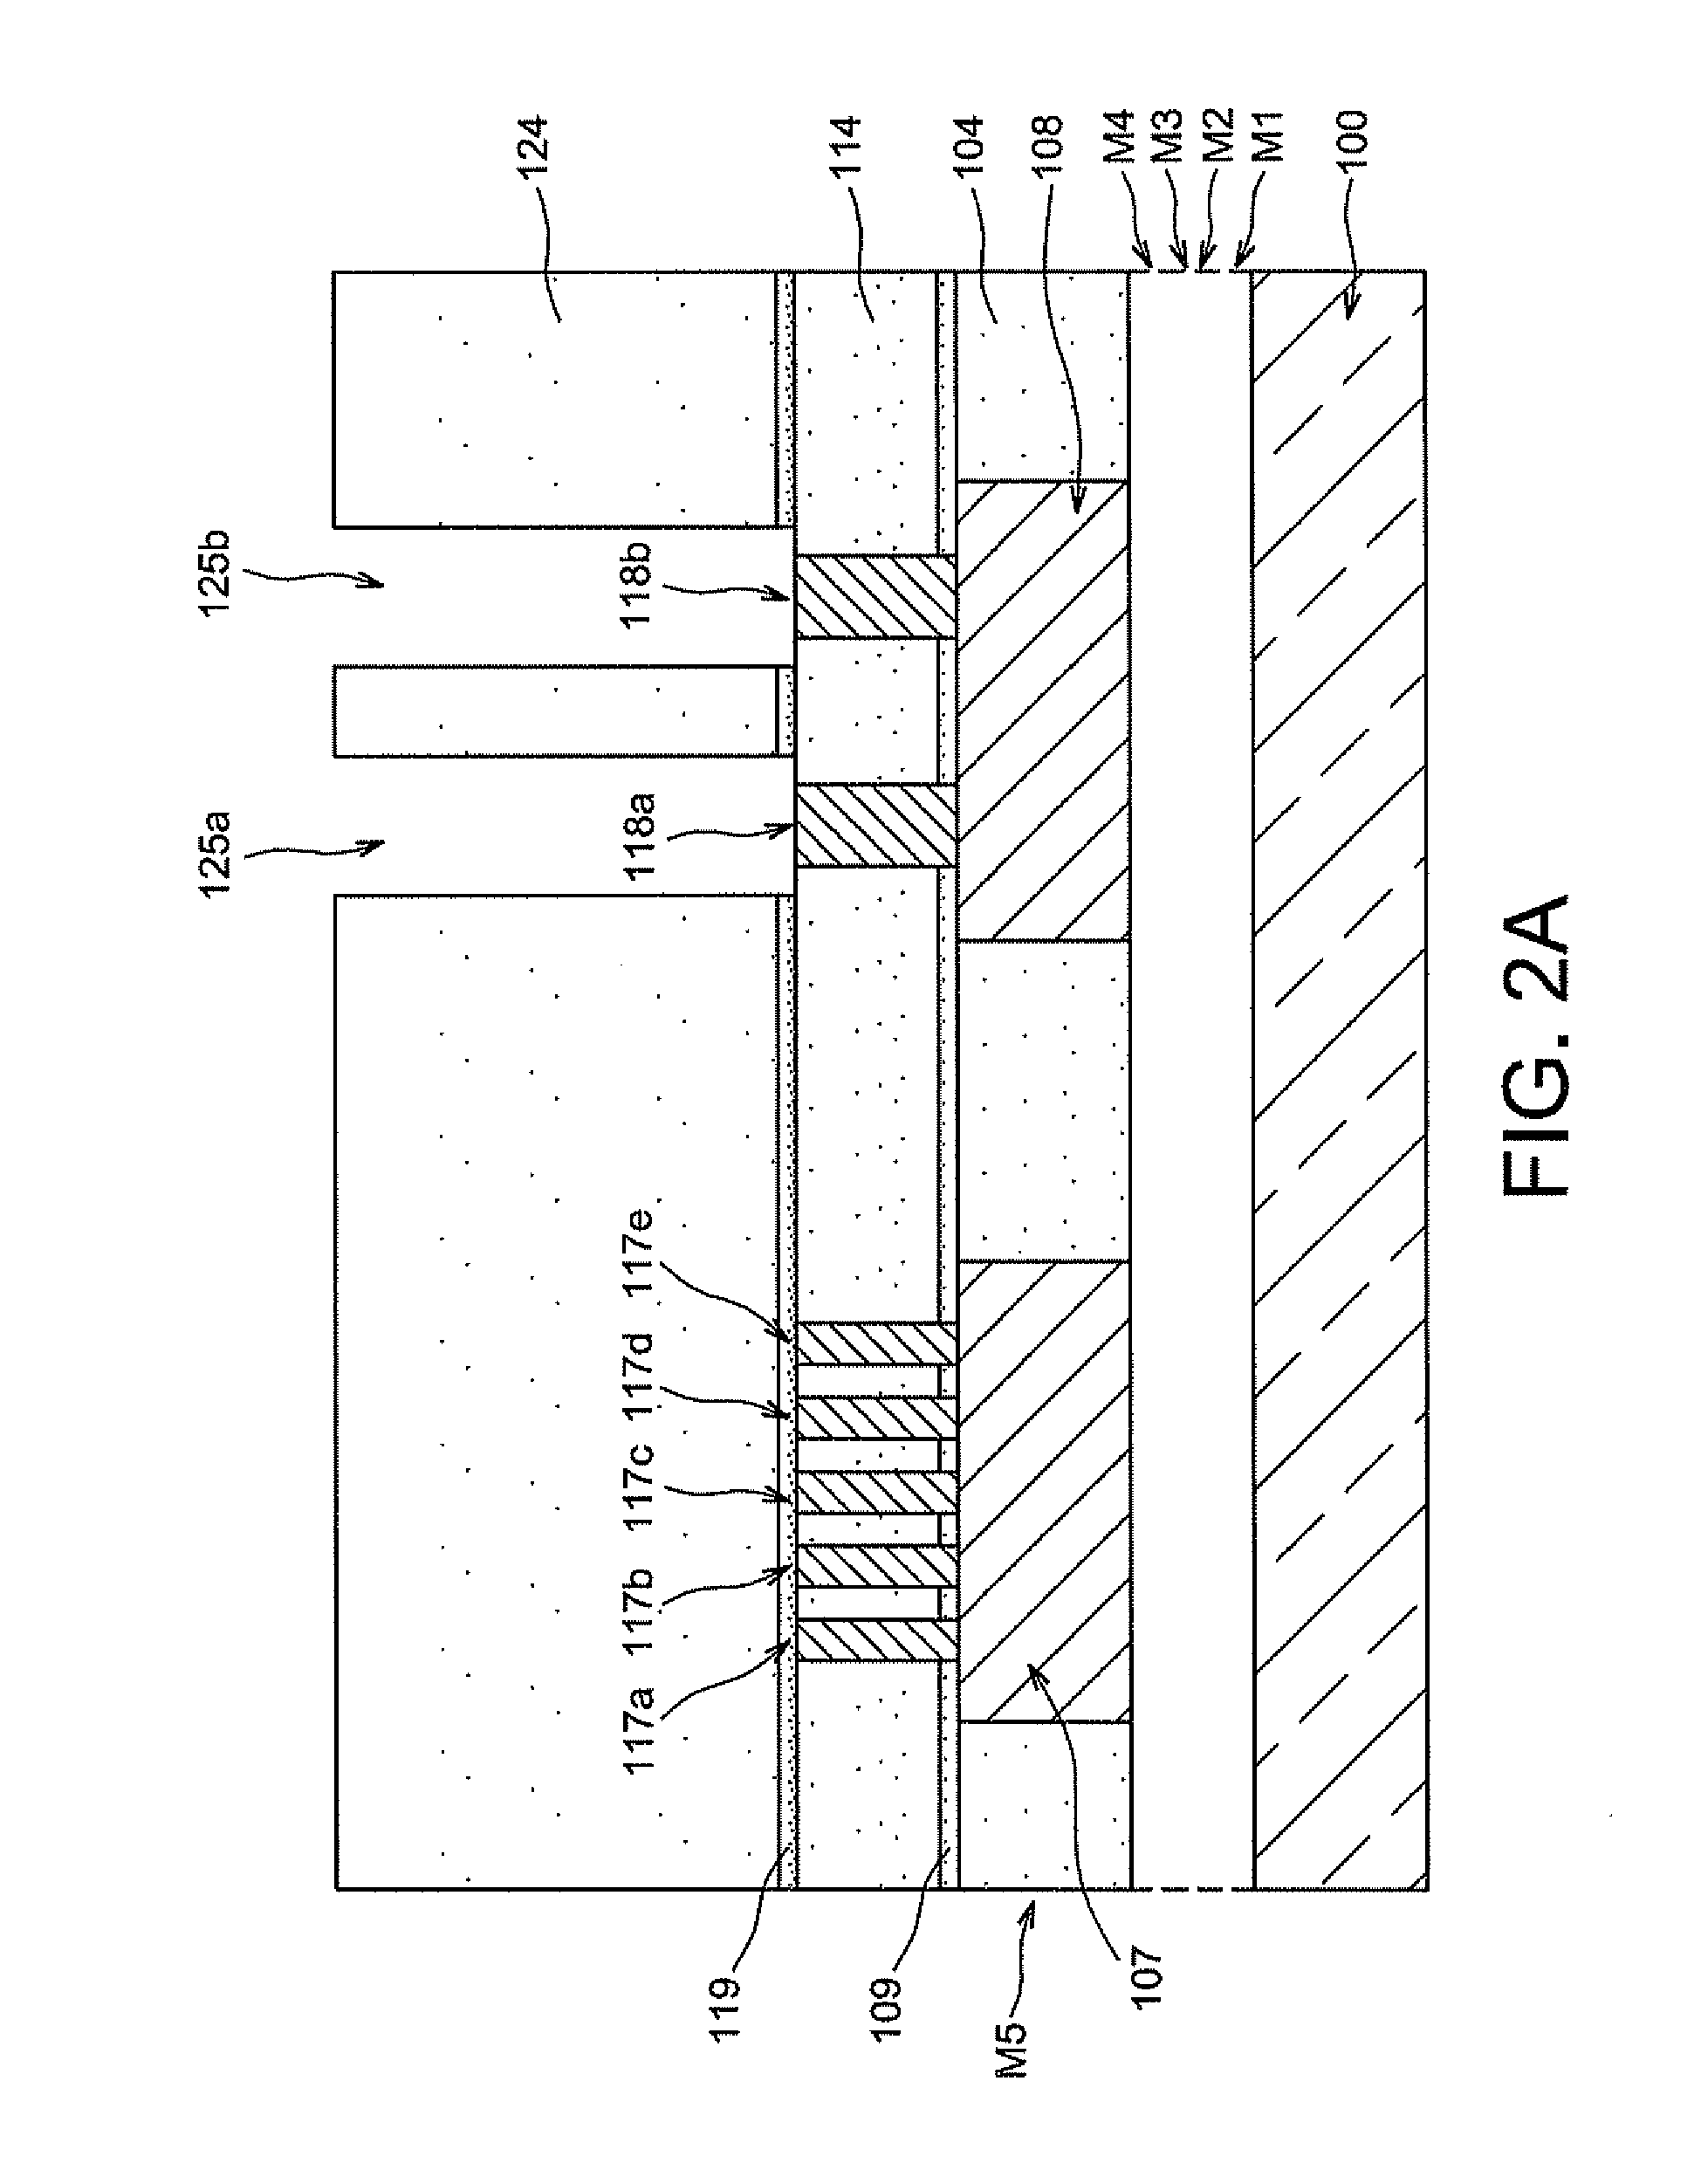 Manufacture of 3 dimensional MIM capacitors in the last metal level of an integrated circuit